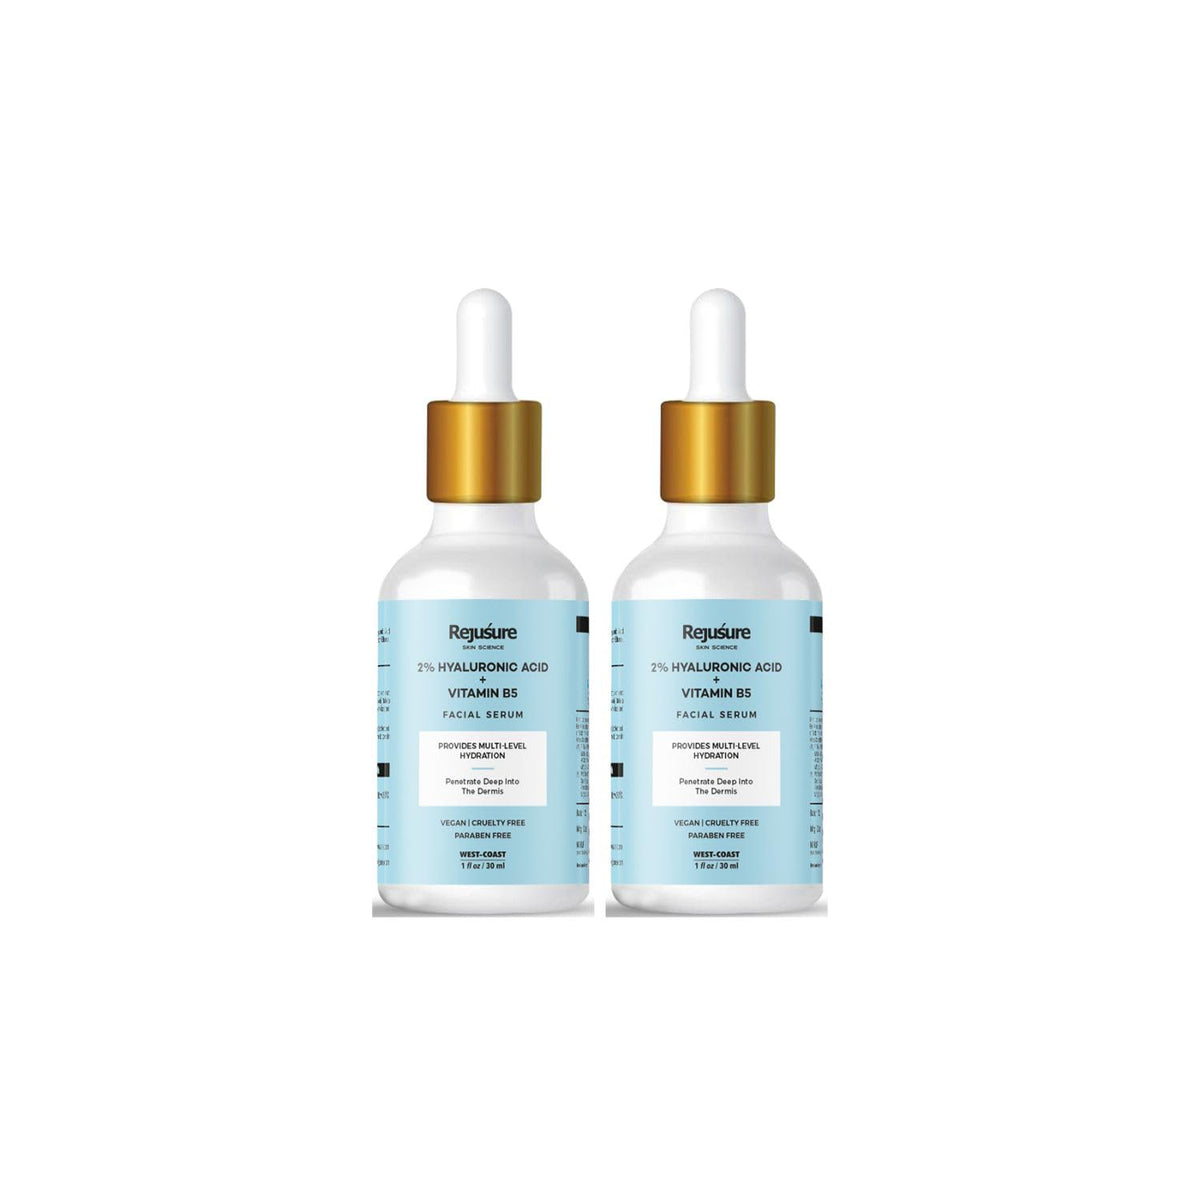 Rejusure 2% Hyaluronic Acid + Vitamin B5 Facial Serum Provides Multi-Level Hydration for Women & Men with Dry & Normal Skin – 30ml (Pack of 2)